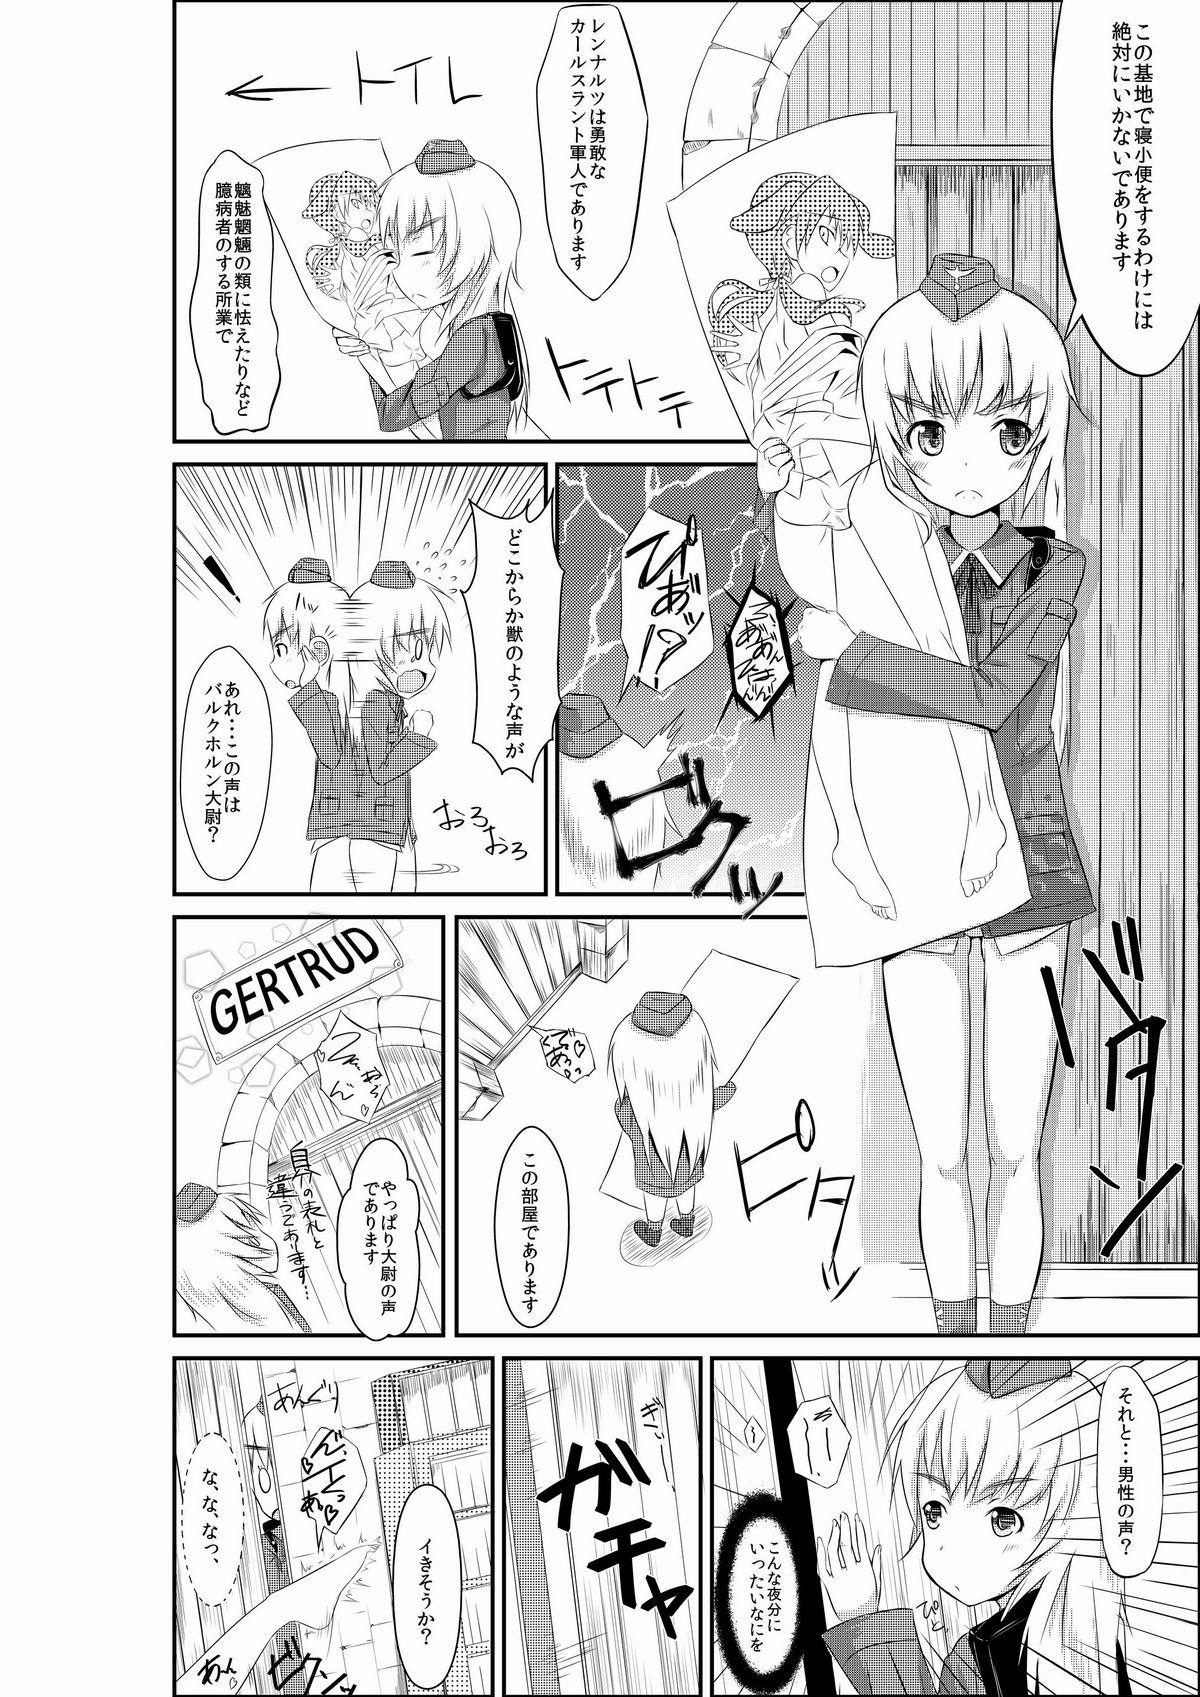 Dorm 練習 お姉ちゃんとヘルマちゃん - Strike witches Doctor Sex - Page 2